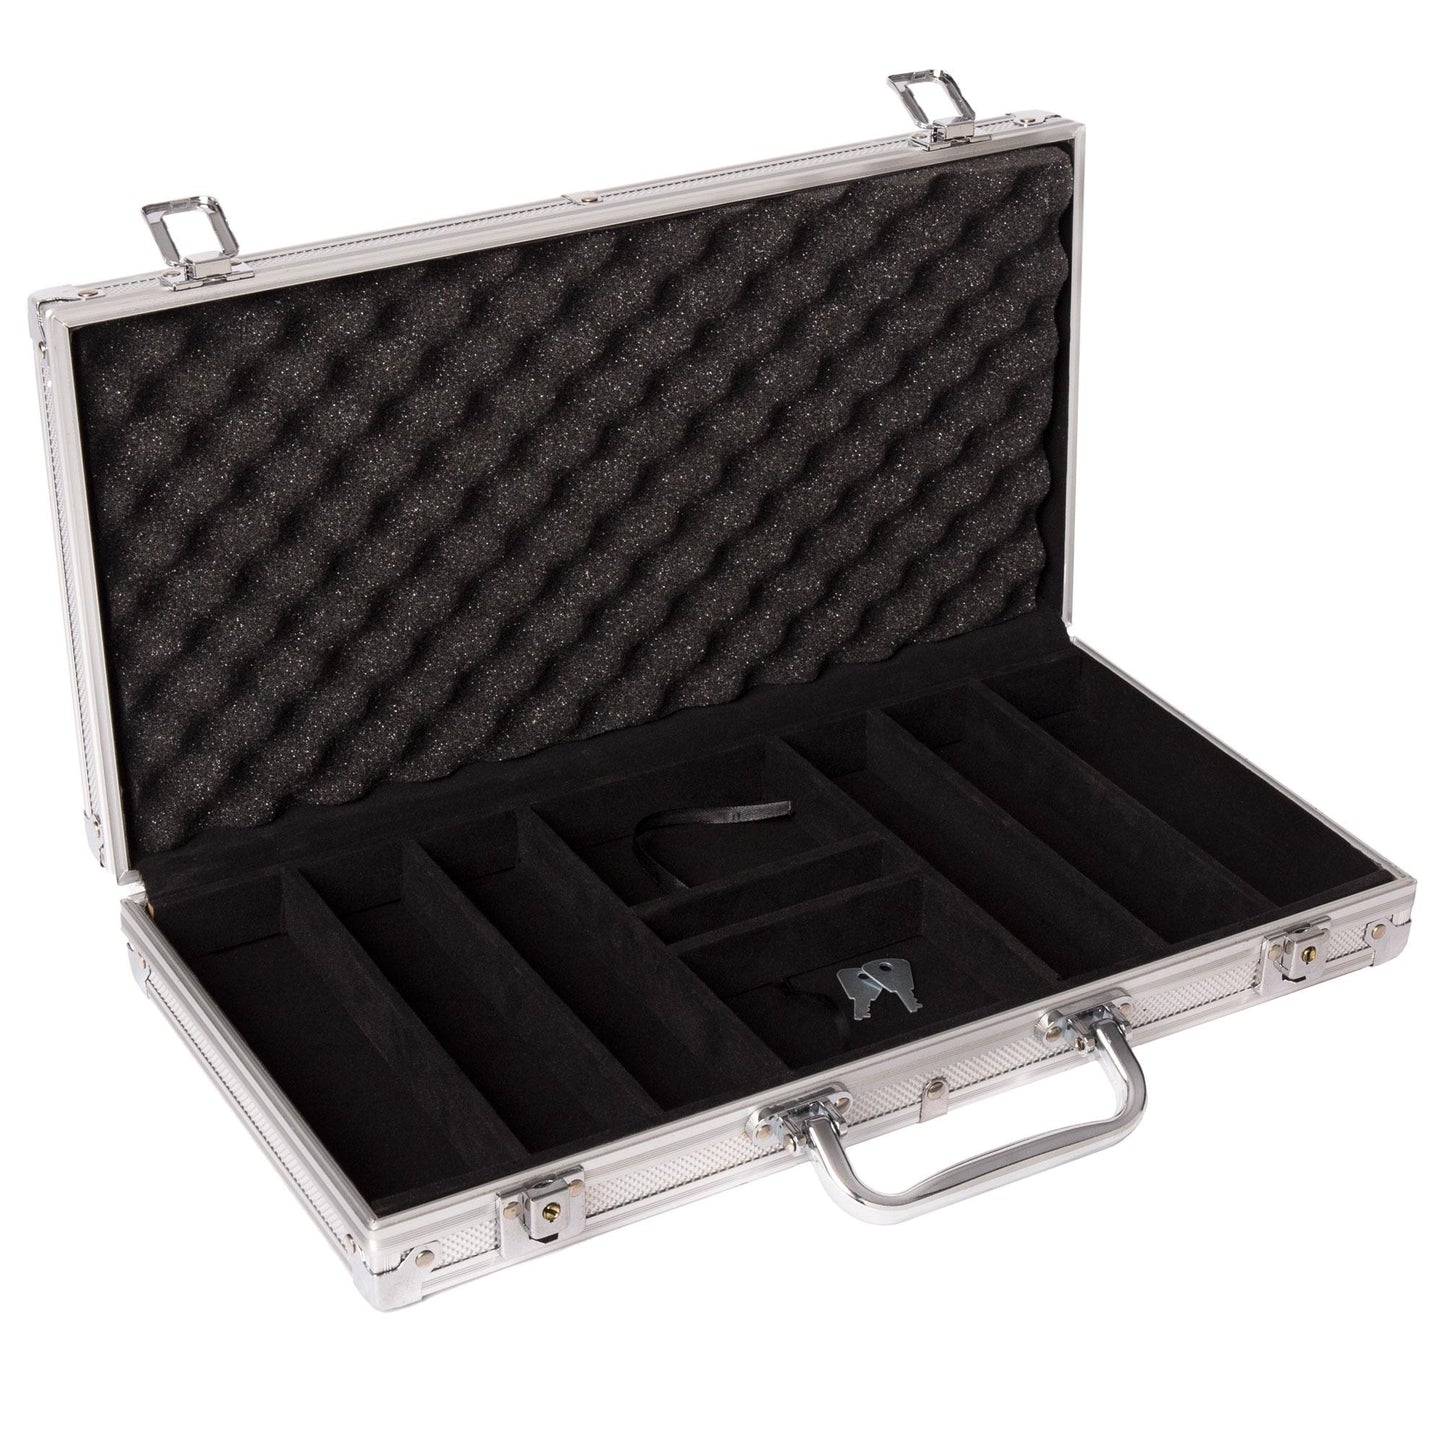 300 Diamond Suited Poker Chips with Aluminum Case